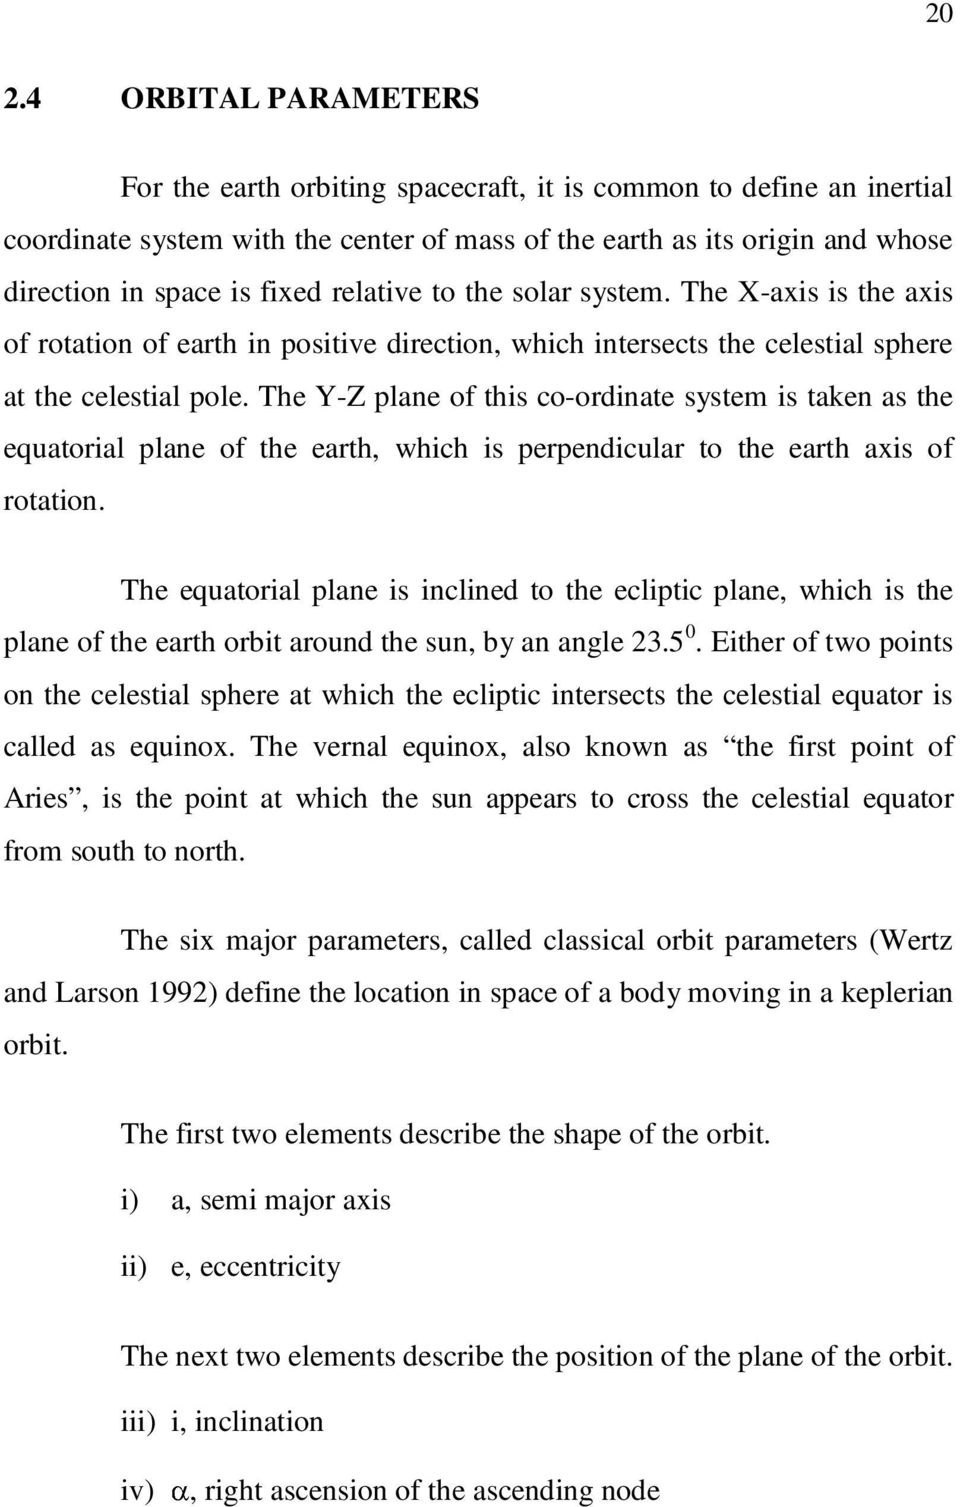 The Y-Z plane of this co-ordinate system is taken as the equatorial plane of the earth, which is perpendicular to the earth axis of rotation.